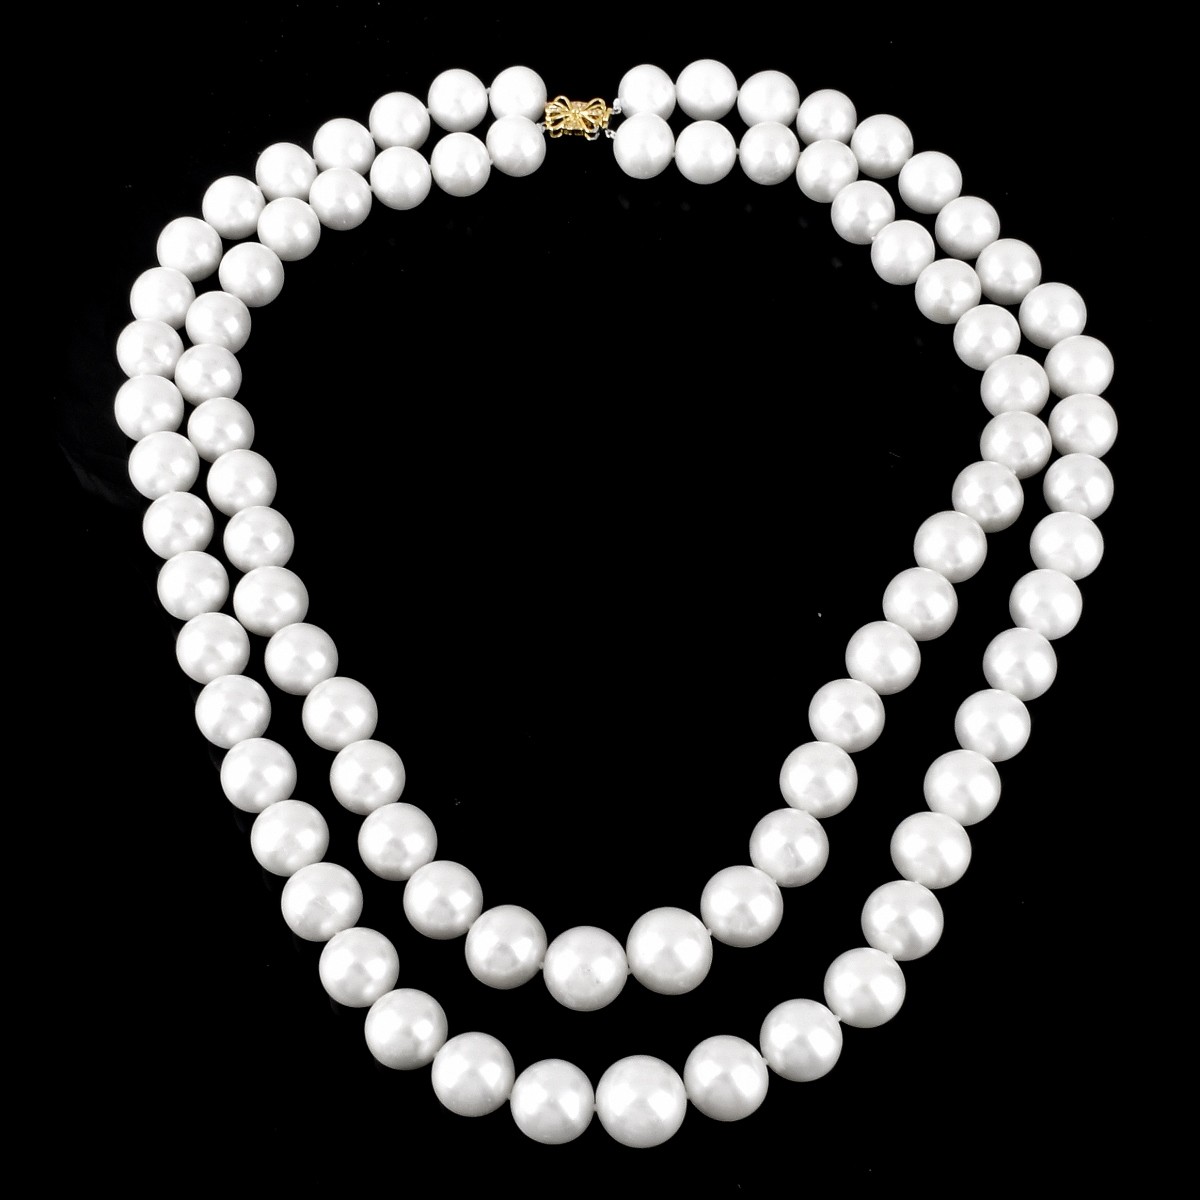 12-15mm South Sea Pearl Necklace